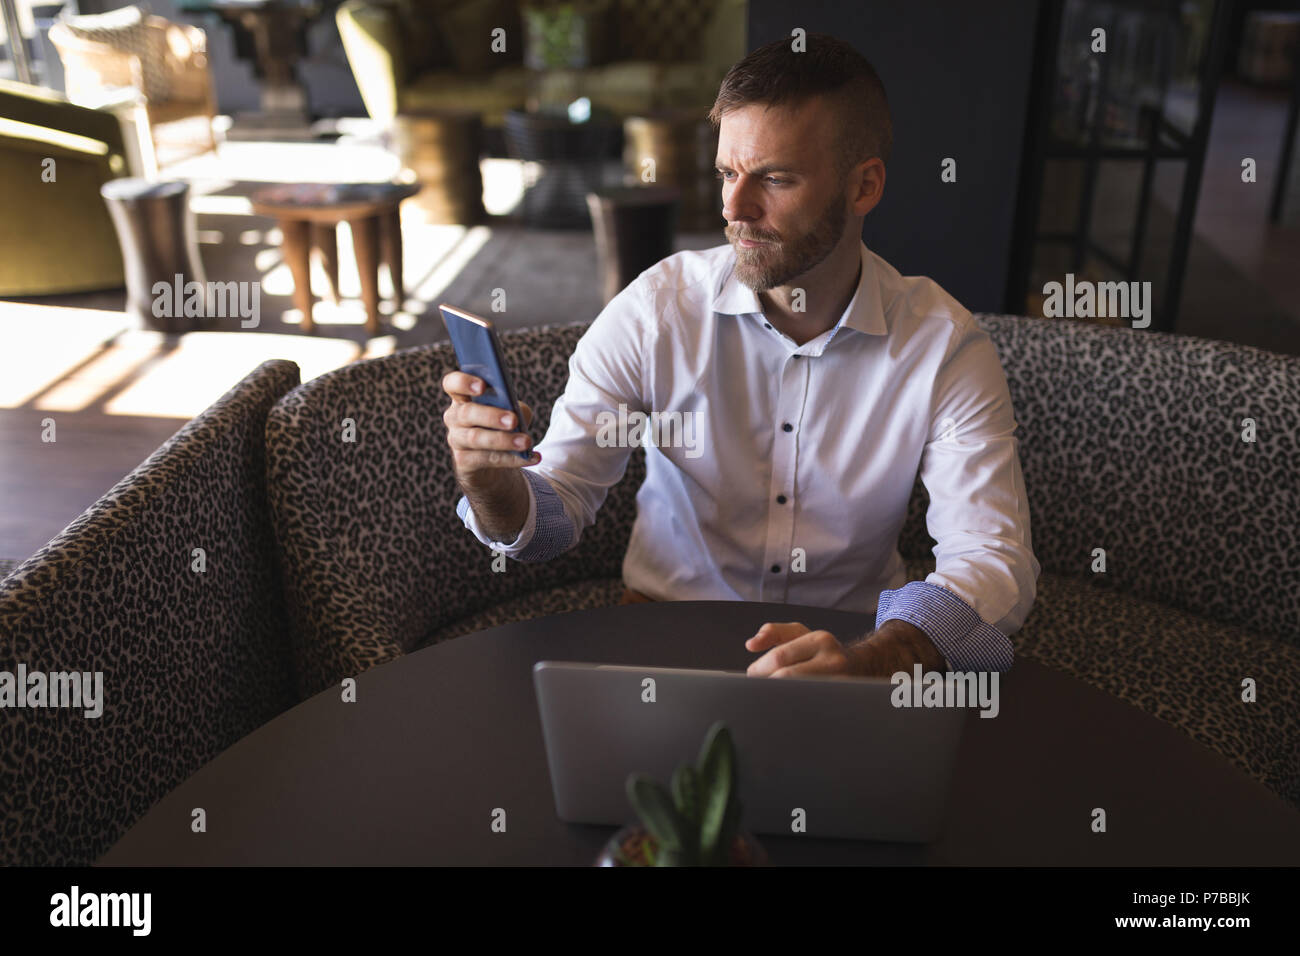 Businessman using phone while working on laptop in cafeteria Stock Photo